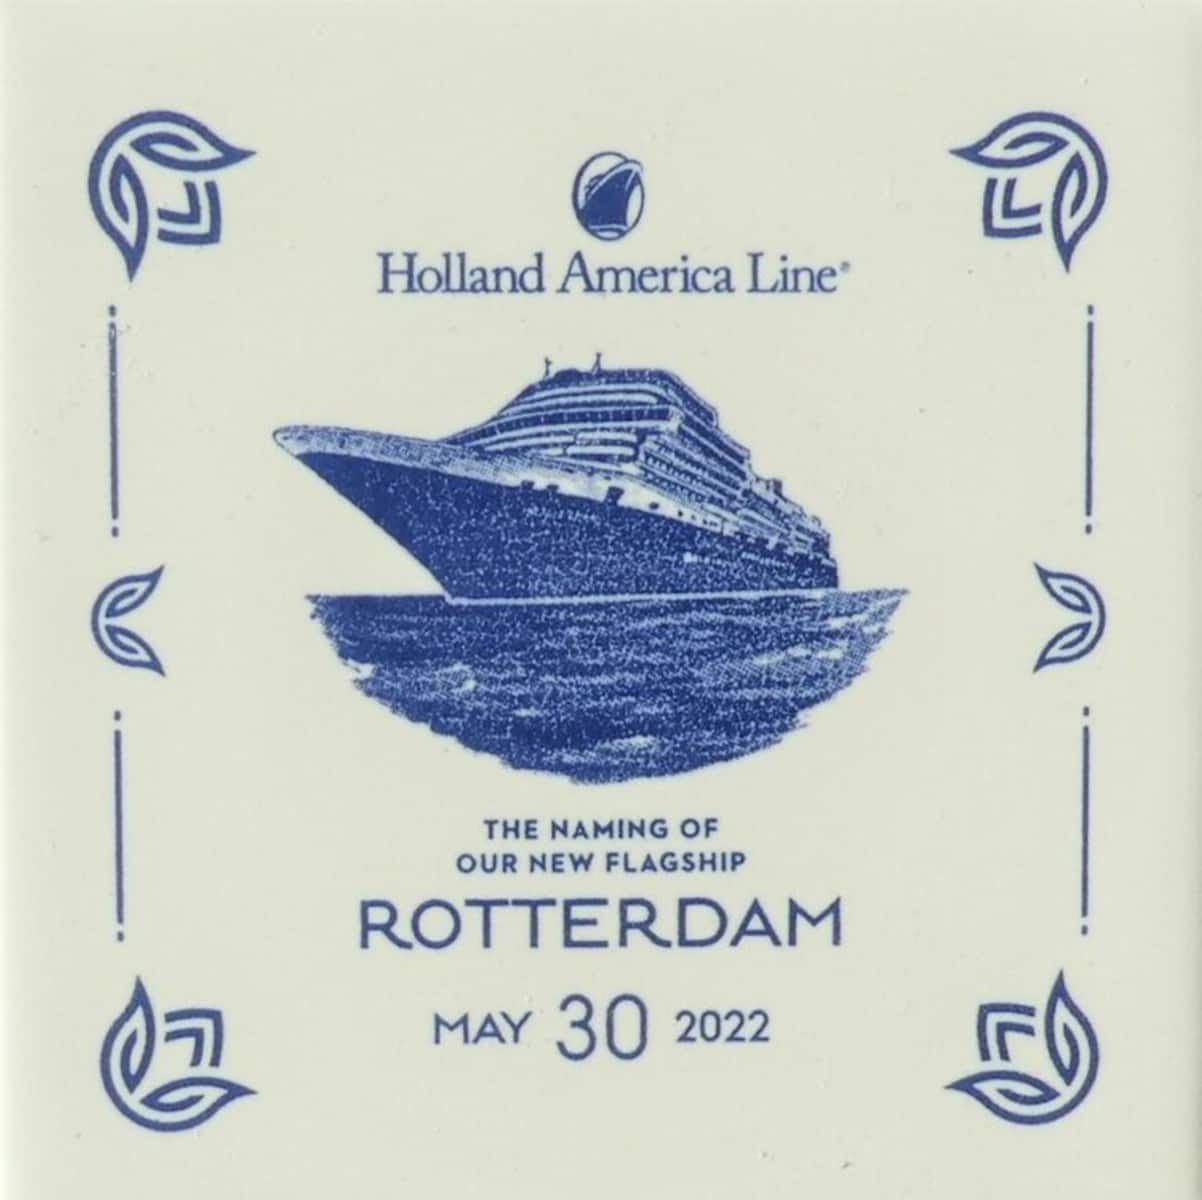 Rotterdam, The Naming of Our New Flagship commemorative tile, Holland America Line, May 30, 2022